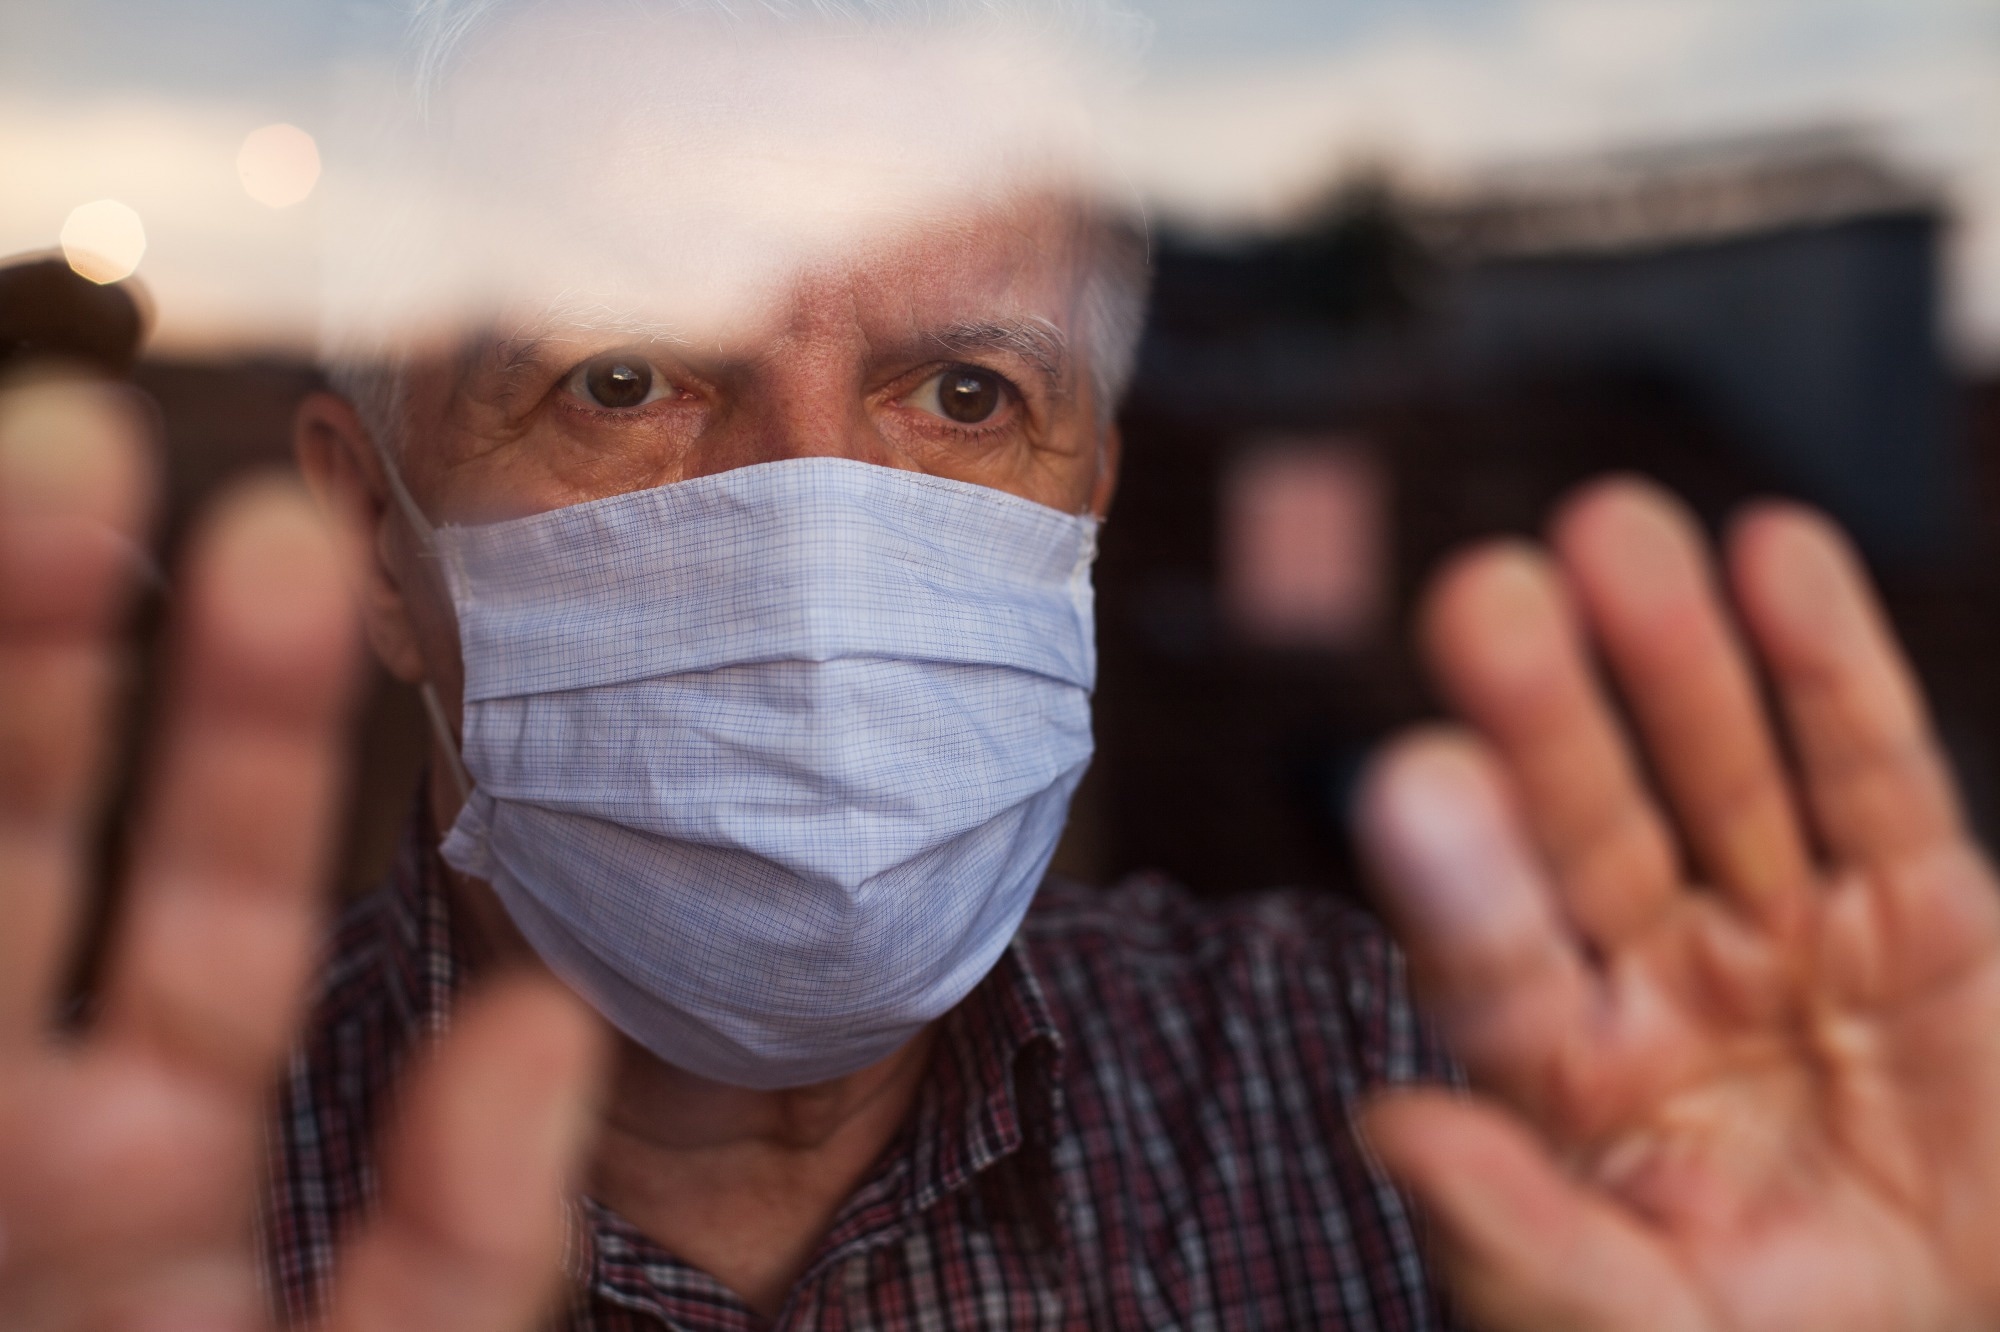 Study: Impact of employment on the elderly in a super-aging society during the COVID-19 pandemic in Japan. Image Credit: Cryptographer/Shutterstock.com